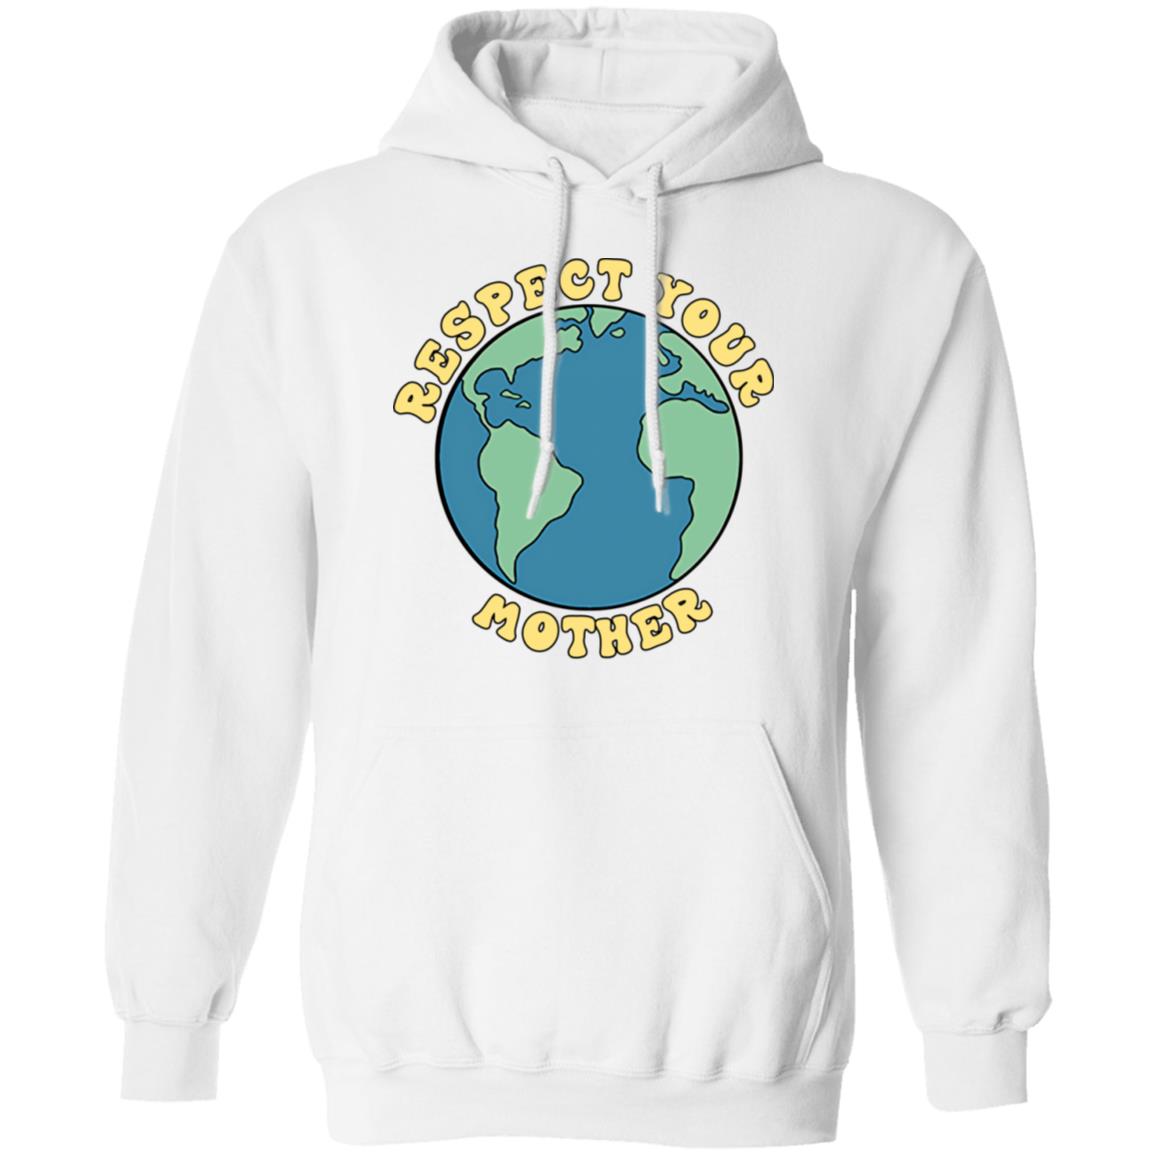 Respect your mother earth shirt